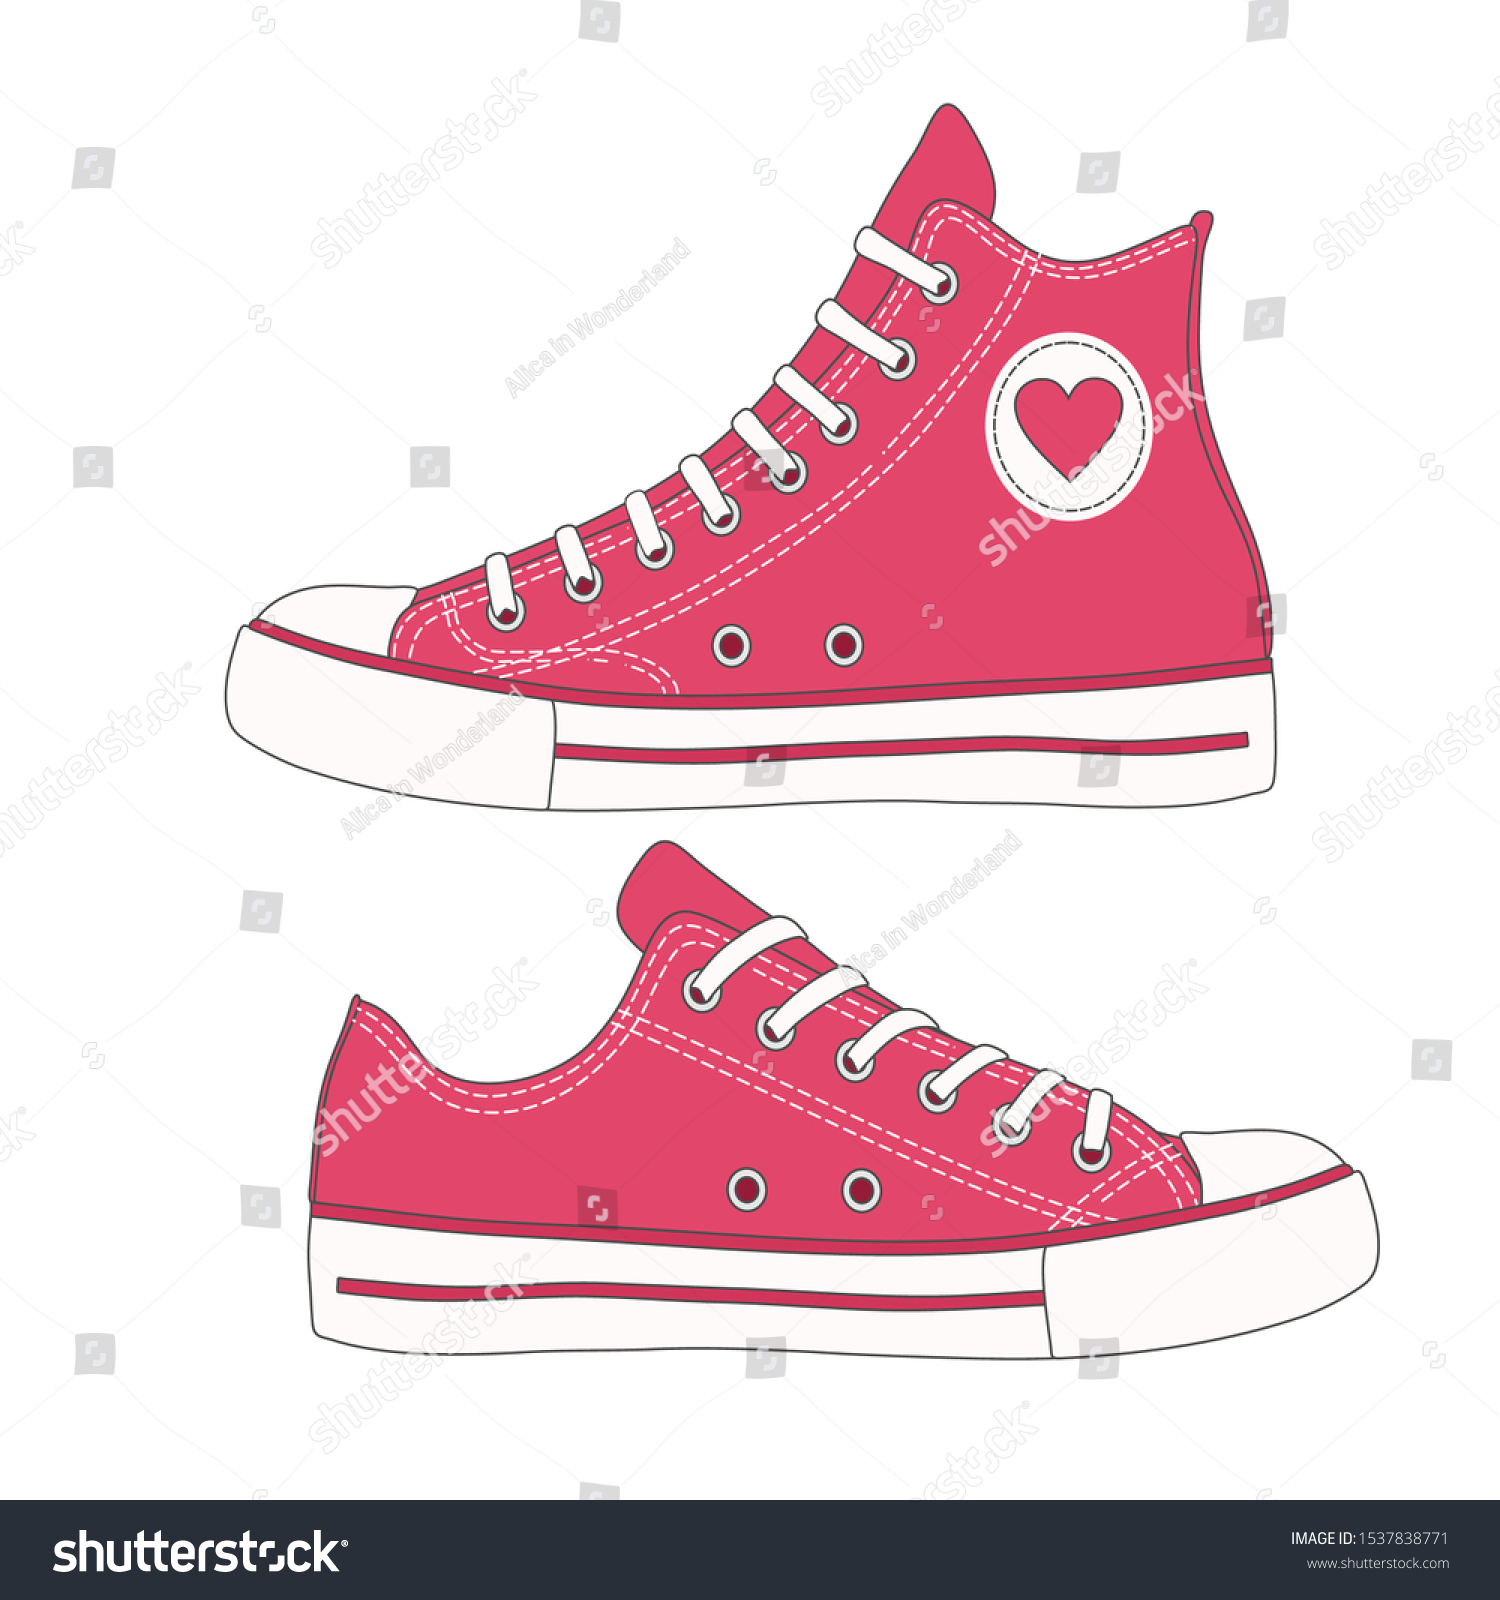 1,391 Red converse shoes Images, Stock Photos & Vectors | Shutterstock